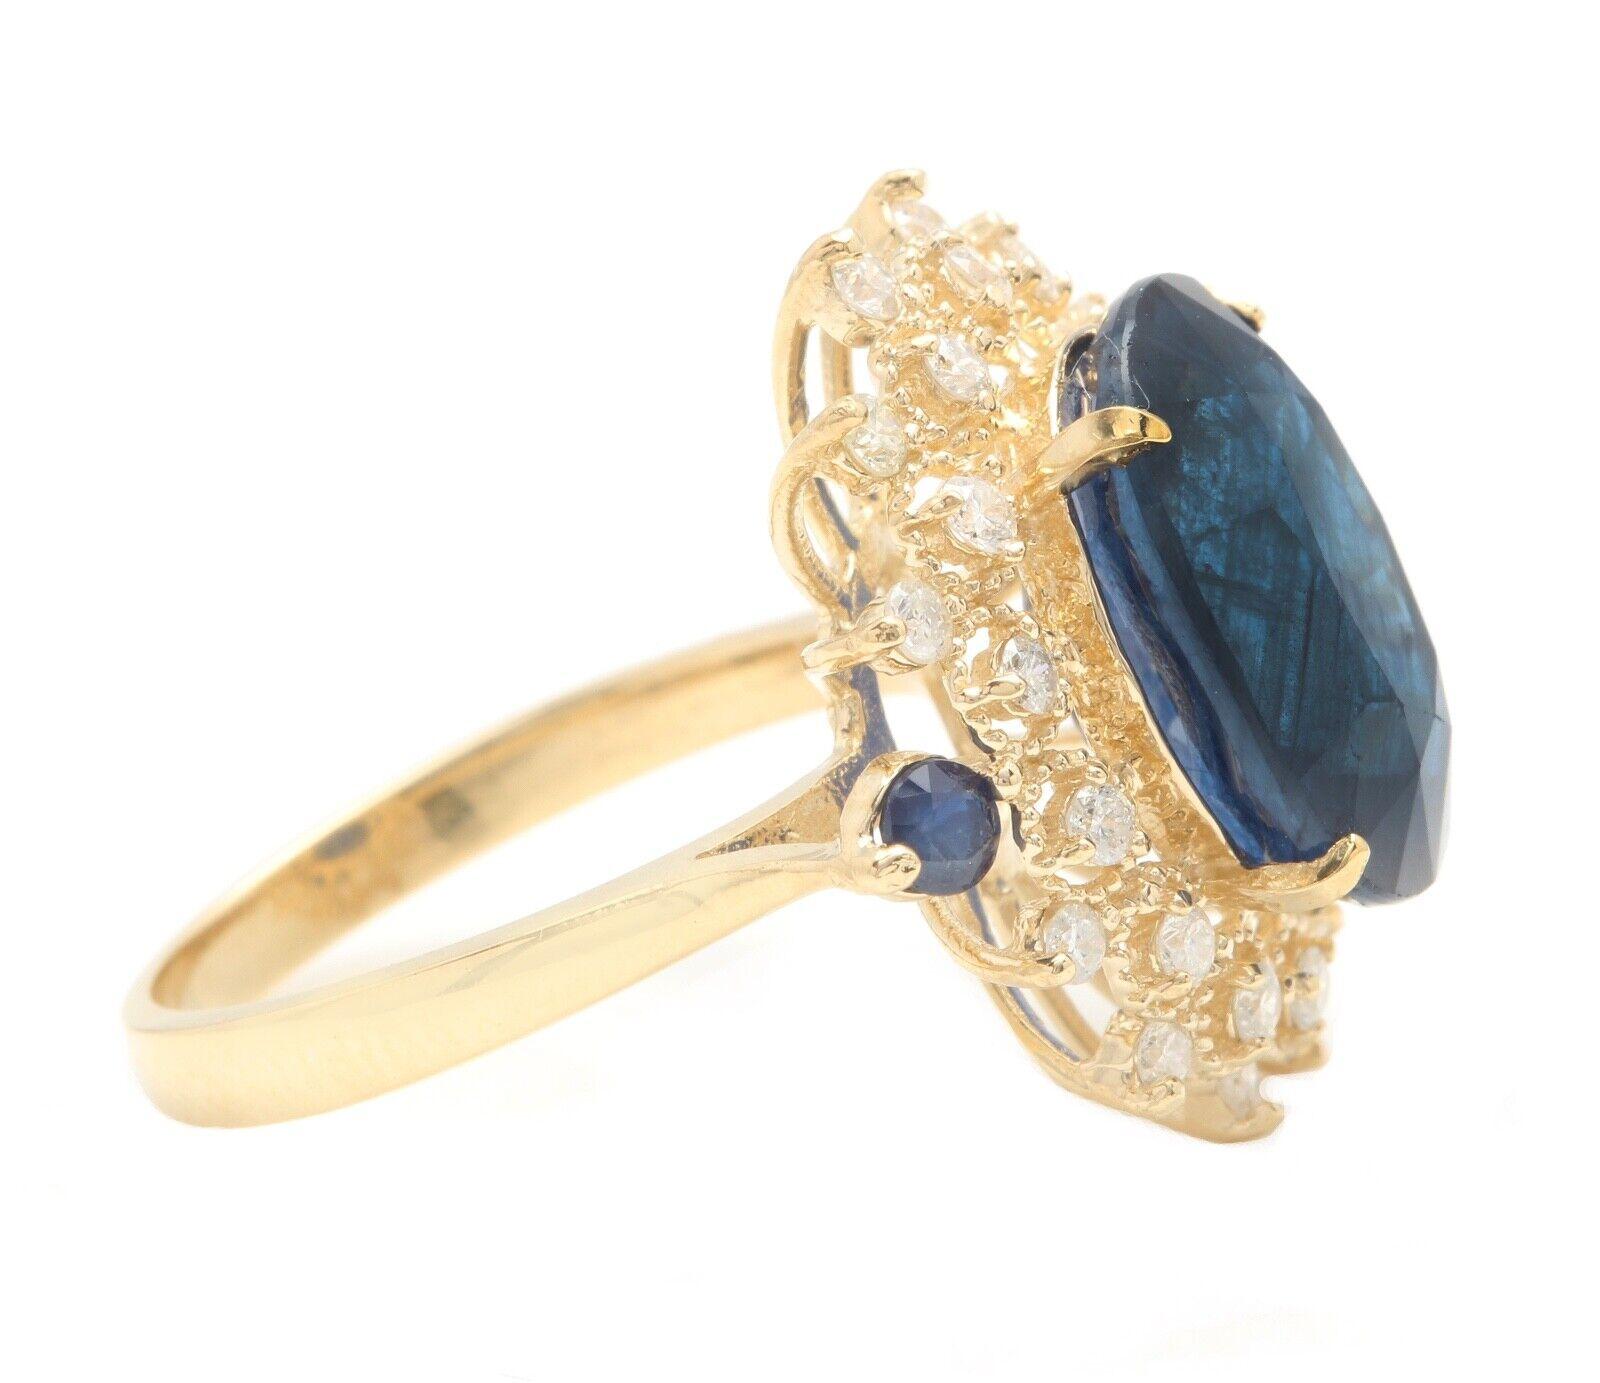 Mixed Cut 8.55 Ct Exquisite Natural Blue Sapphire and Diamond 14k Solid Yellow Gold Ring For Sale